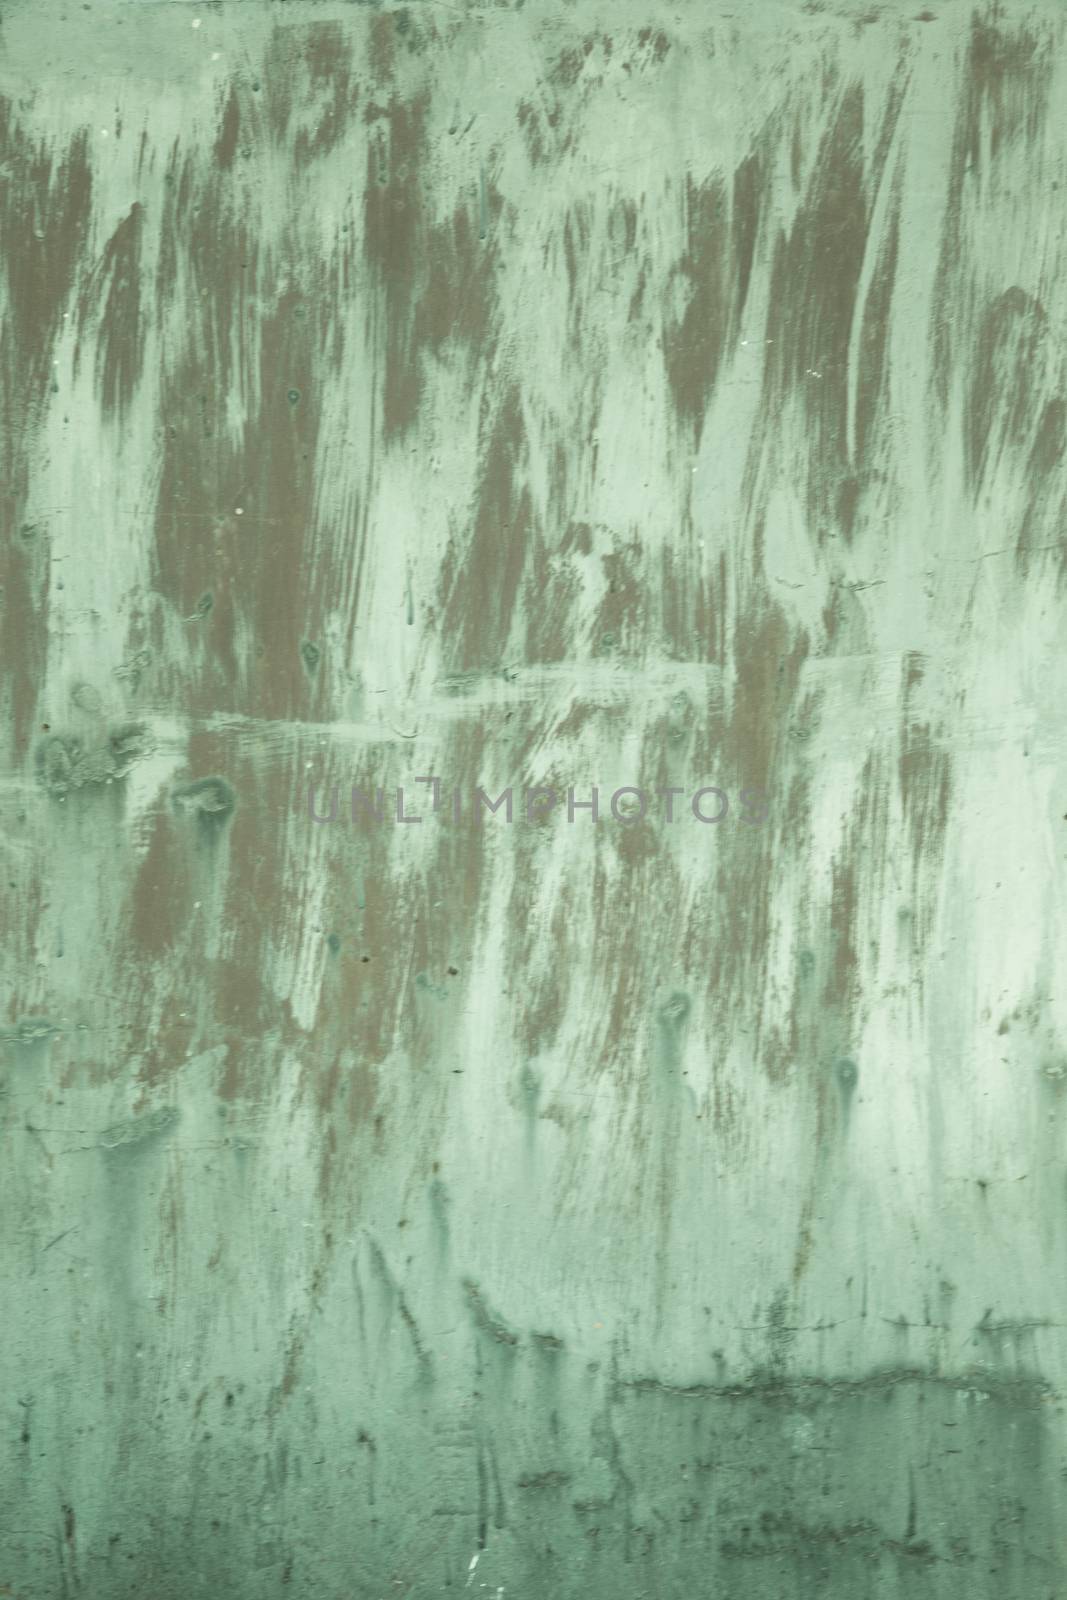 Texture of old grunge rust wall

